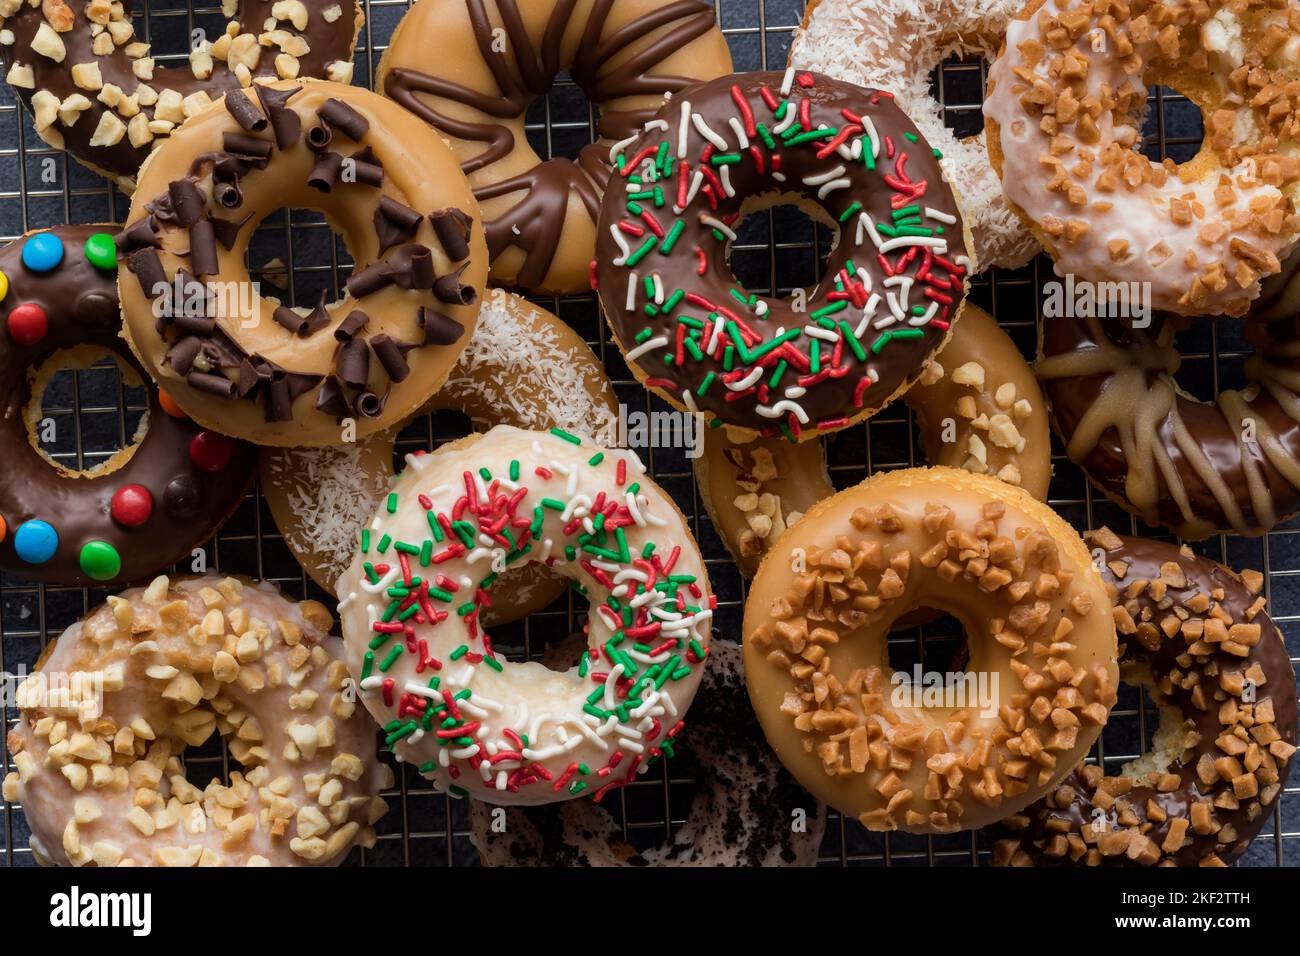 Top down view of a pile of assorted homemade donuts with different toppings. Stock Photo